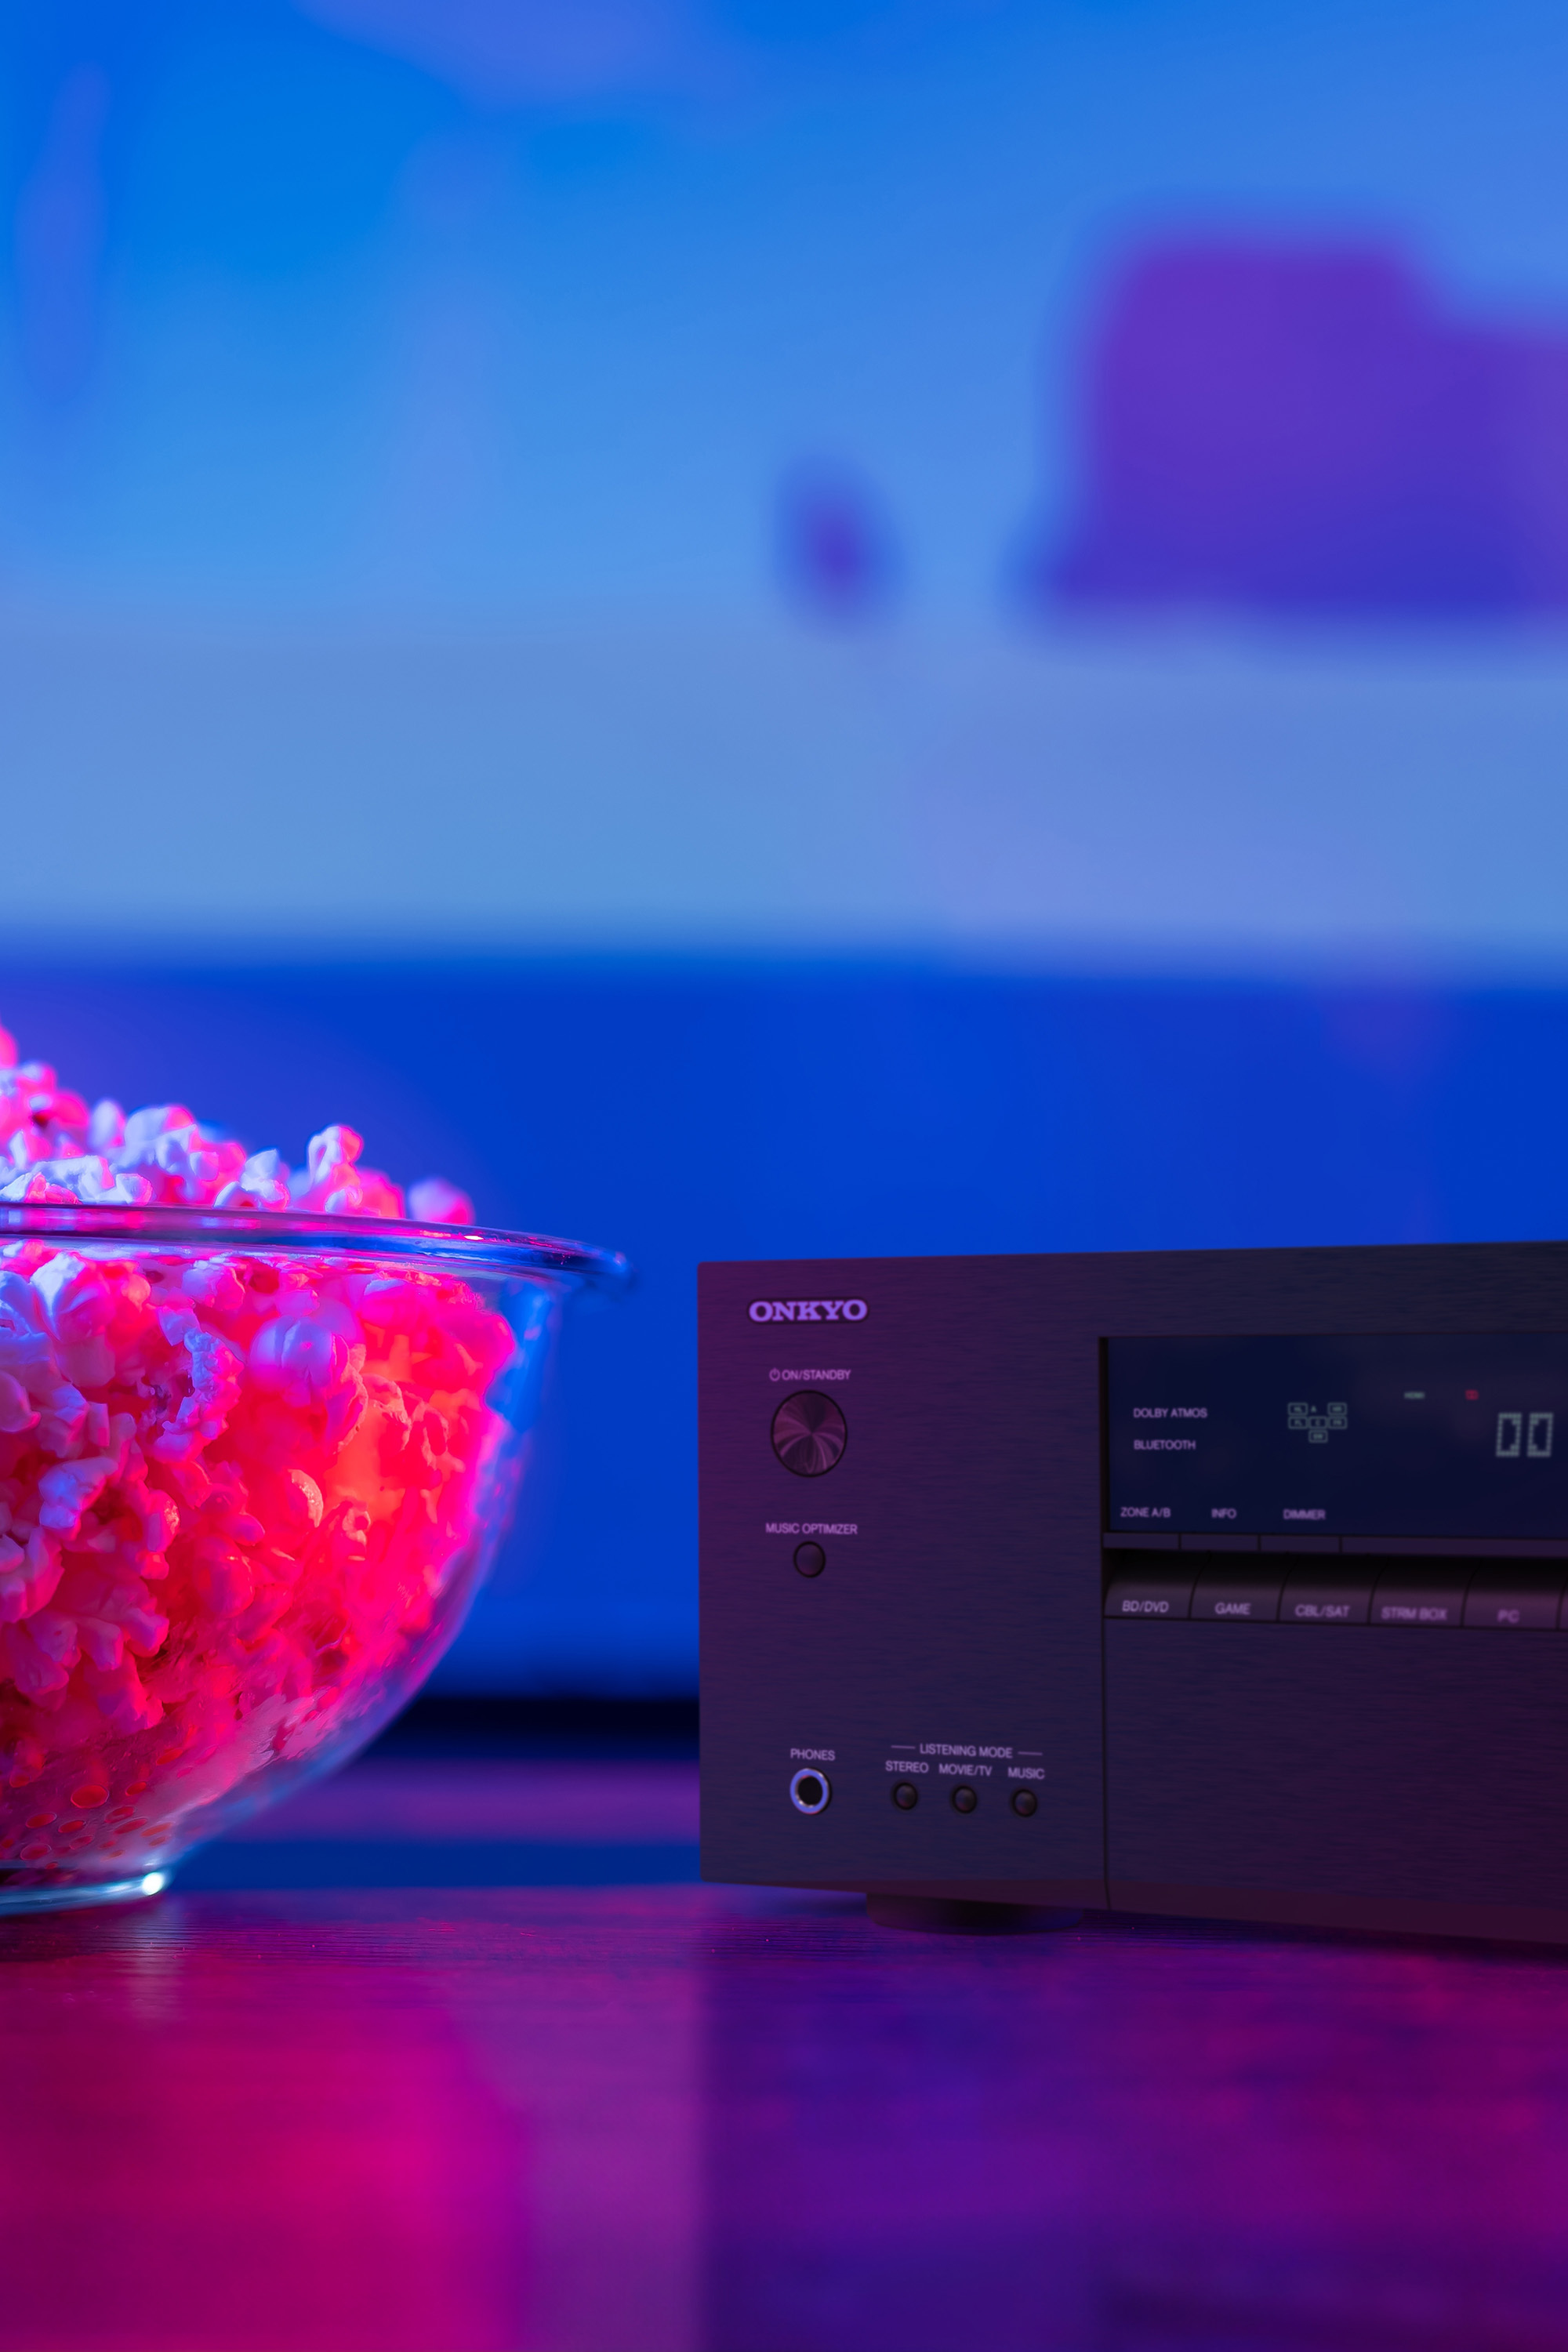 AV Receivers, Stereo Receivers and Home Audio | Onkyo